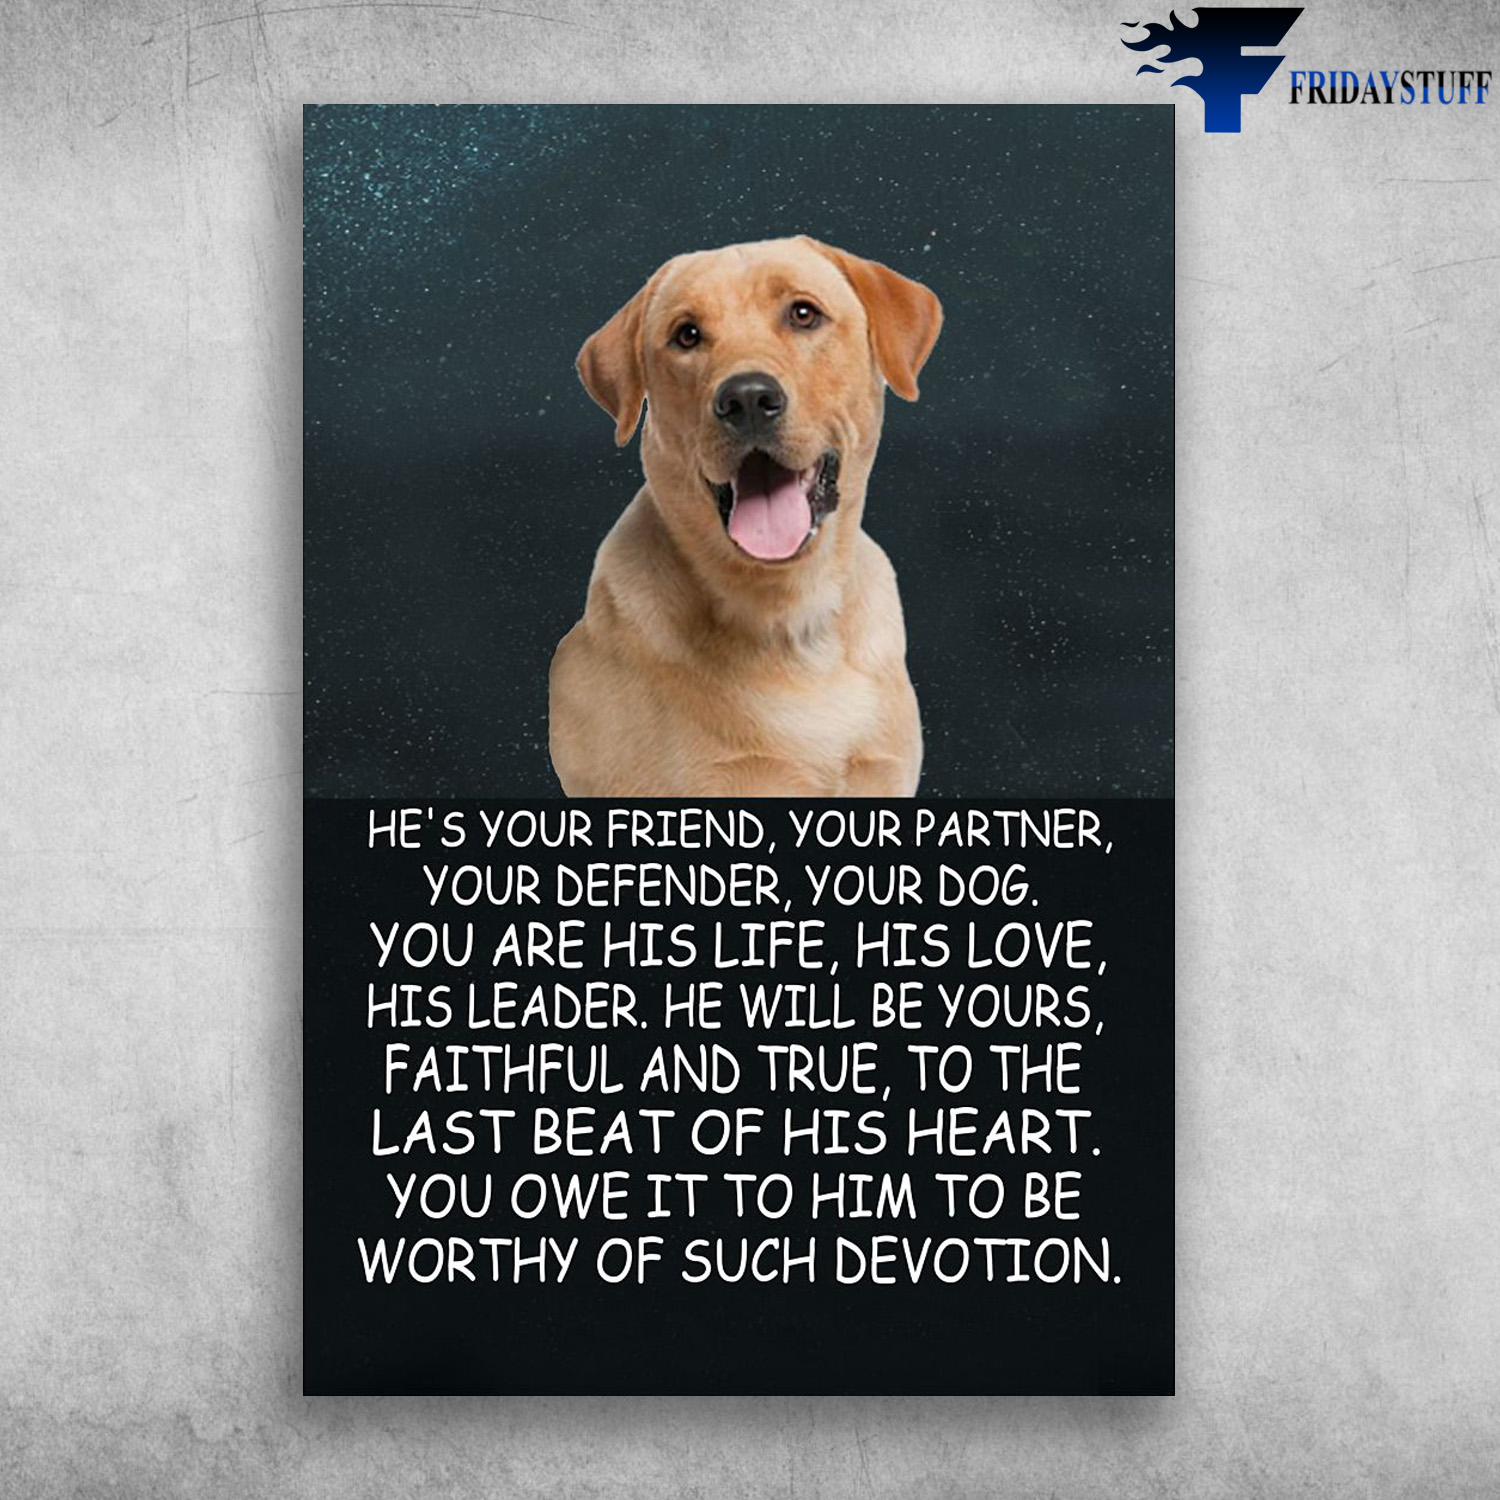 Labrador Dog - He's Your Friend, Your Partner, Your Defender, Your Dog, You Are His Life, His Love, His Leader, He Will Be Yours, Faithful And True, To The Last Of His Heart, You Owe It To Him, To Be Worthy Of Such Devotion